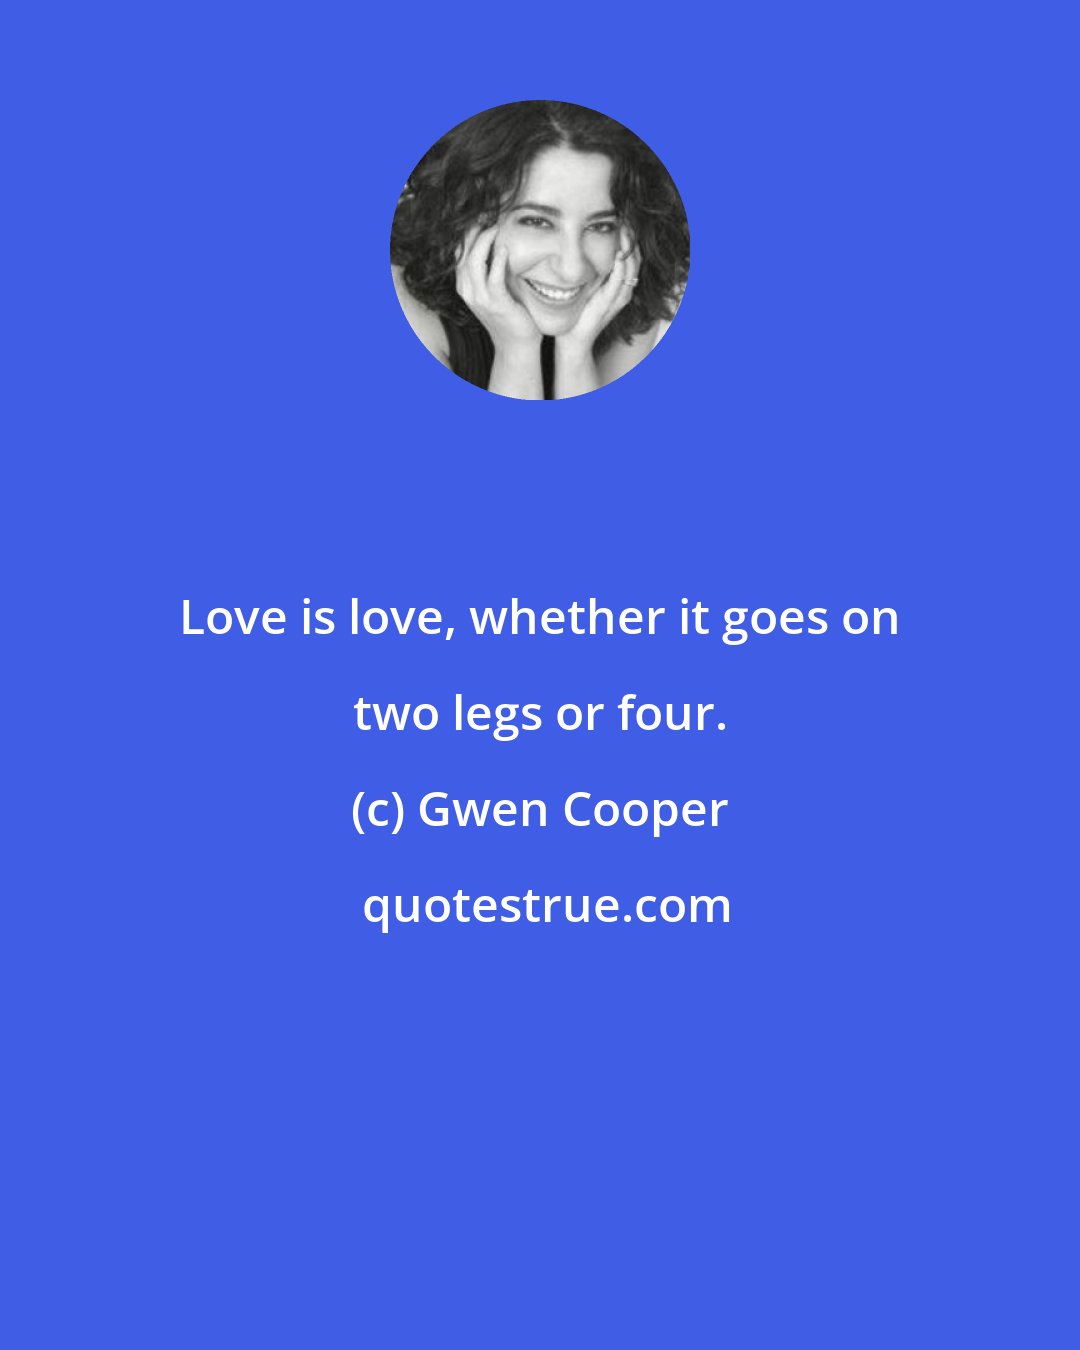 Gwen Cooper: Love is love, whether it goes on two legs or four.